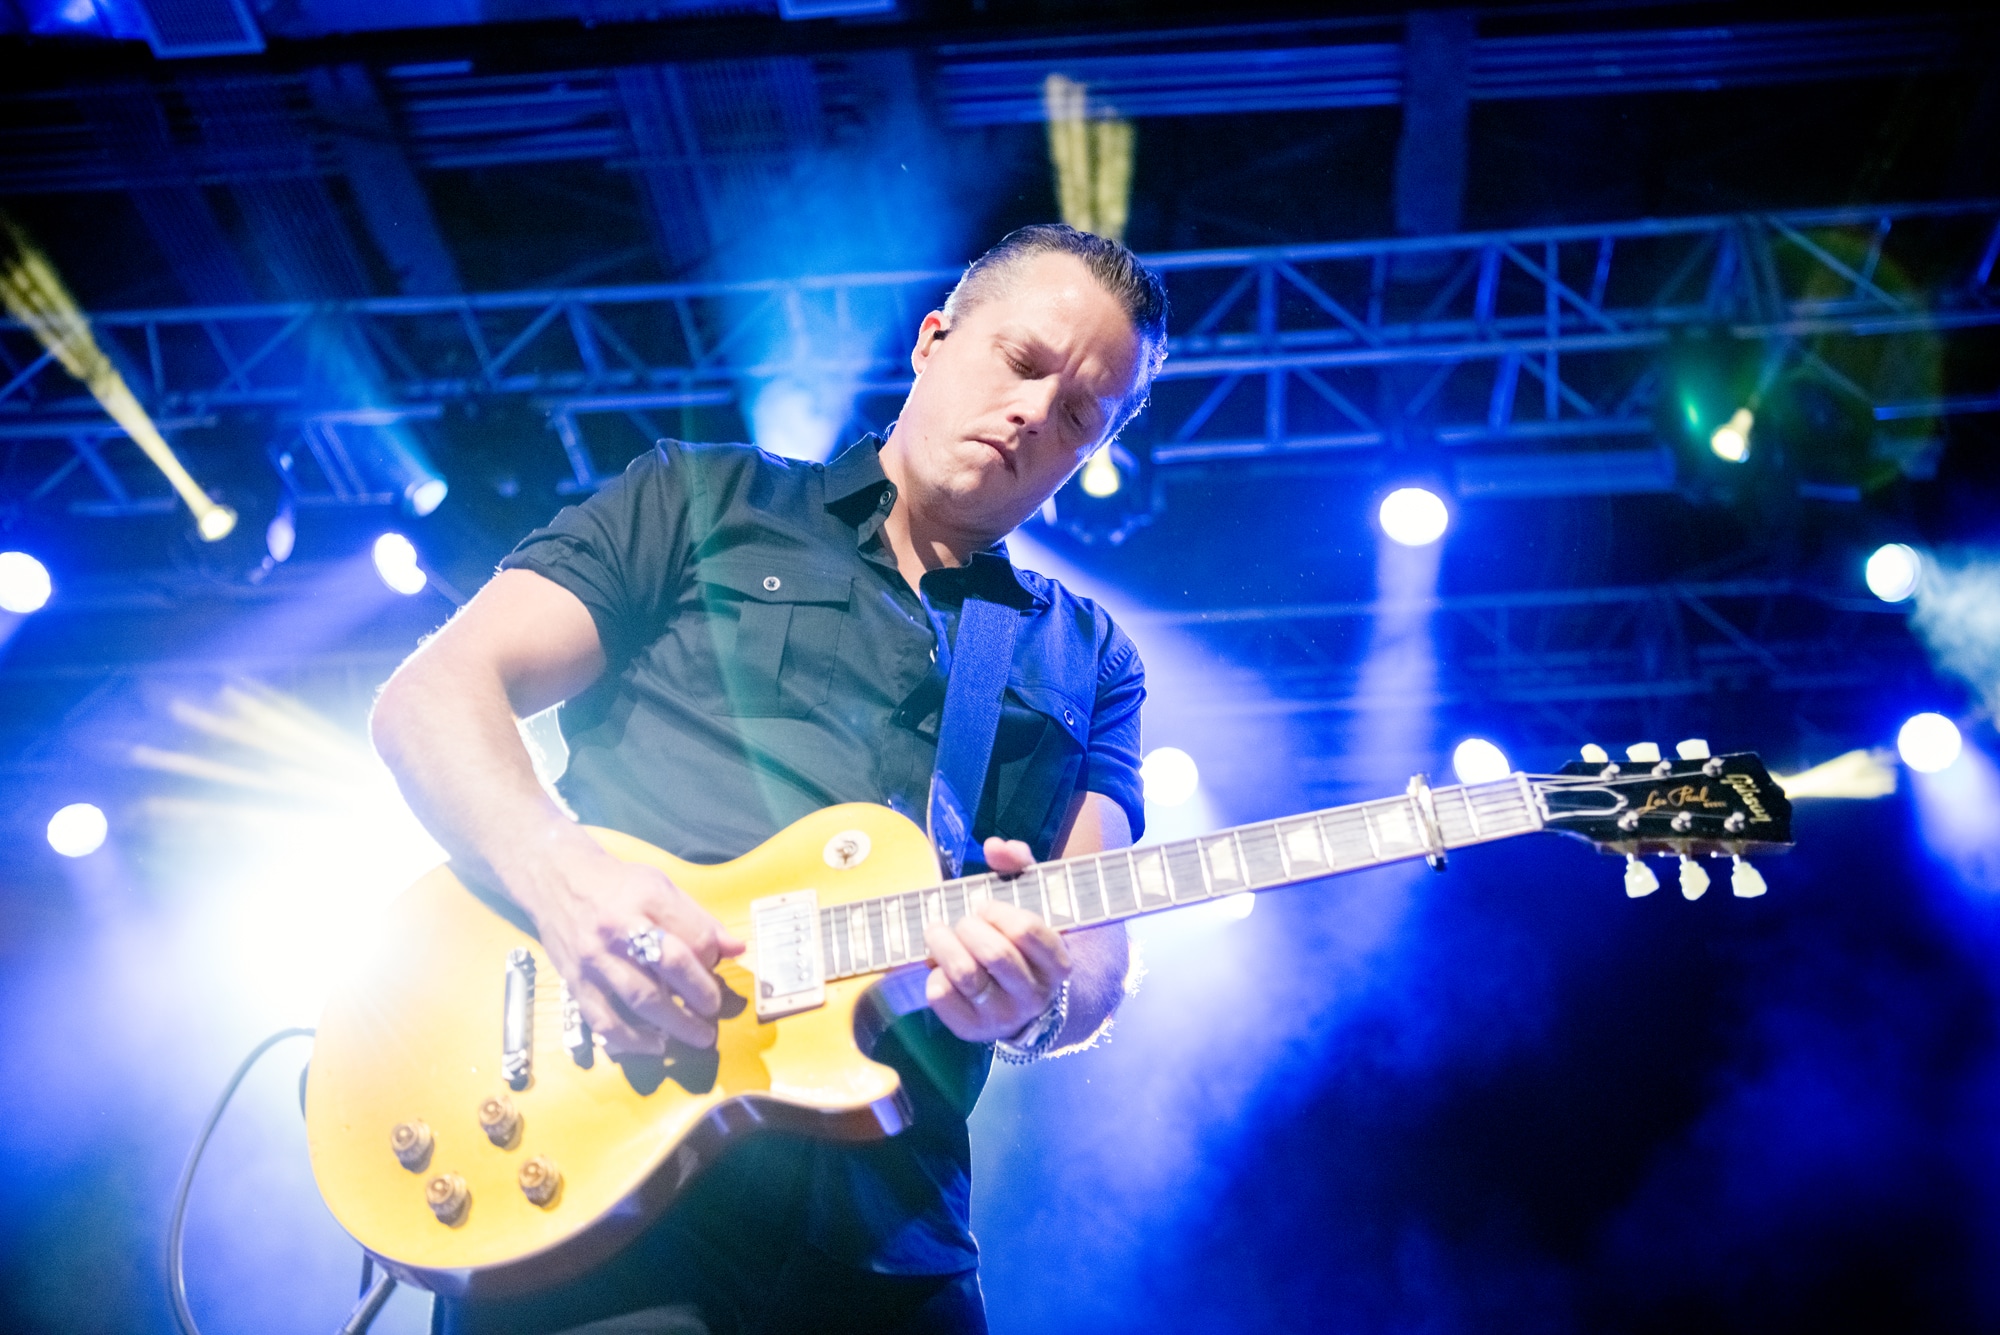 Jason Isbell Eschews the White Man’s Blues On New Single “Hope The High Road”